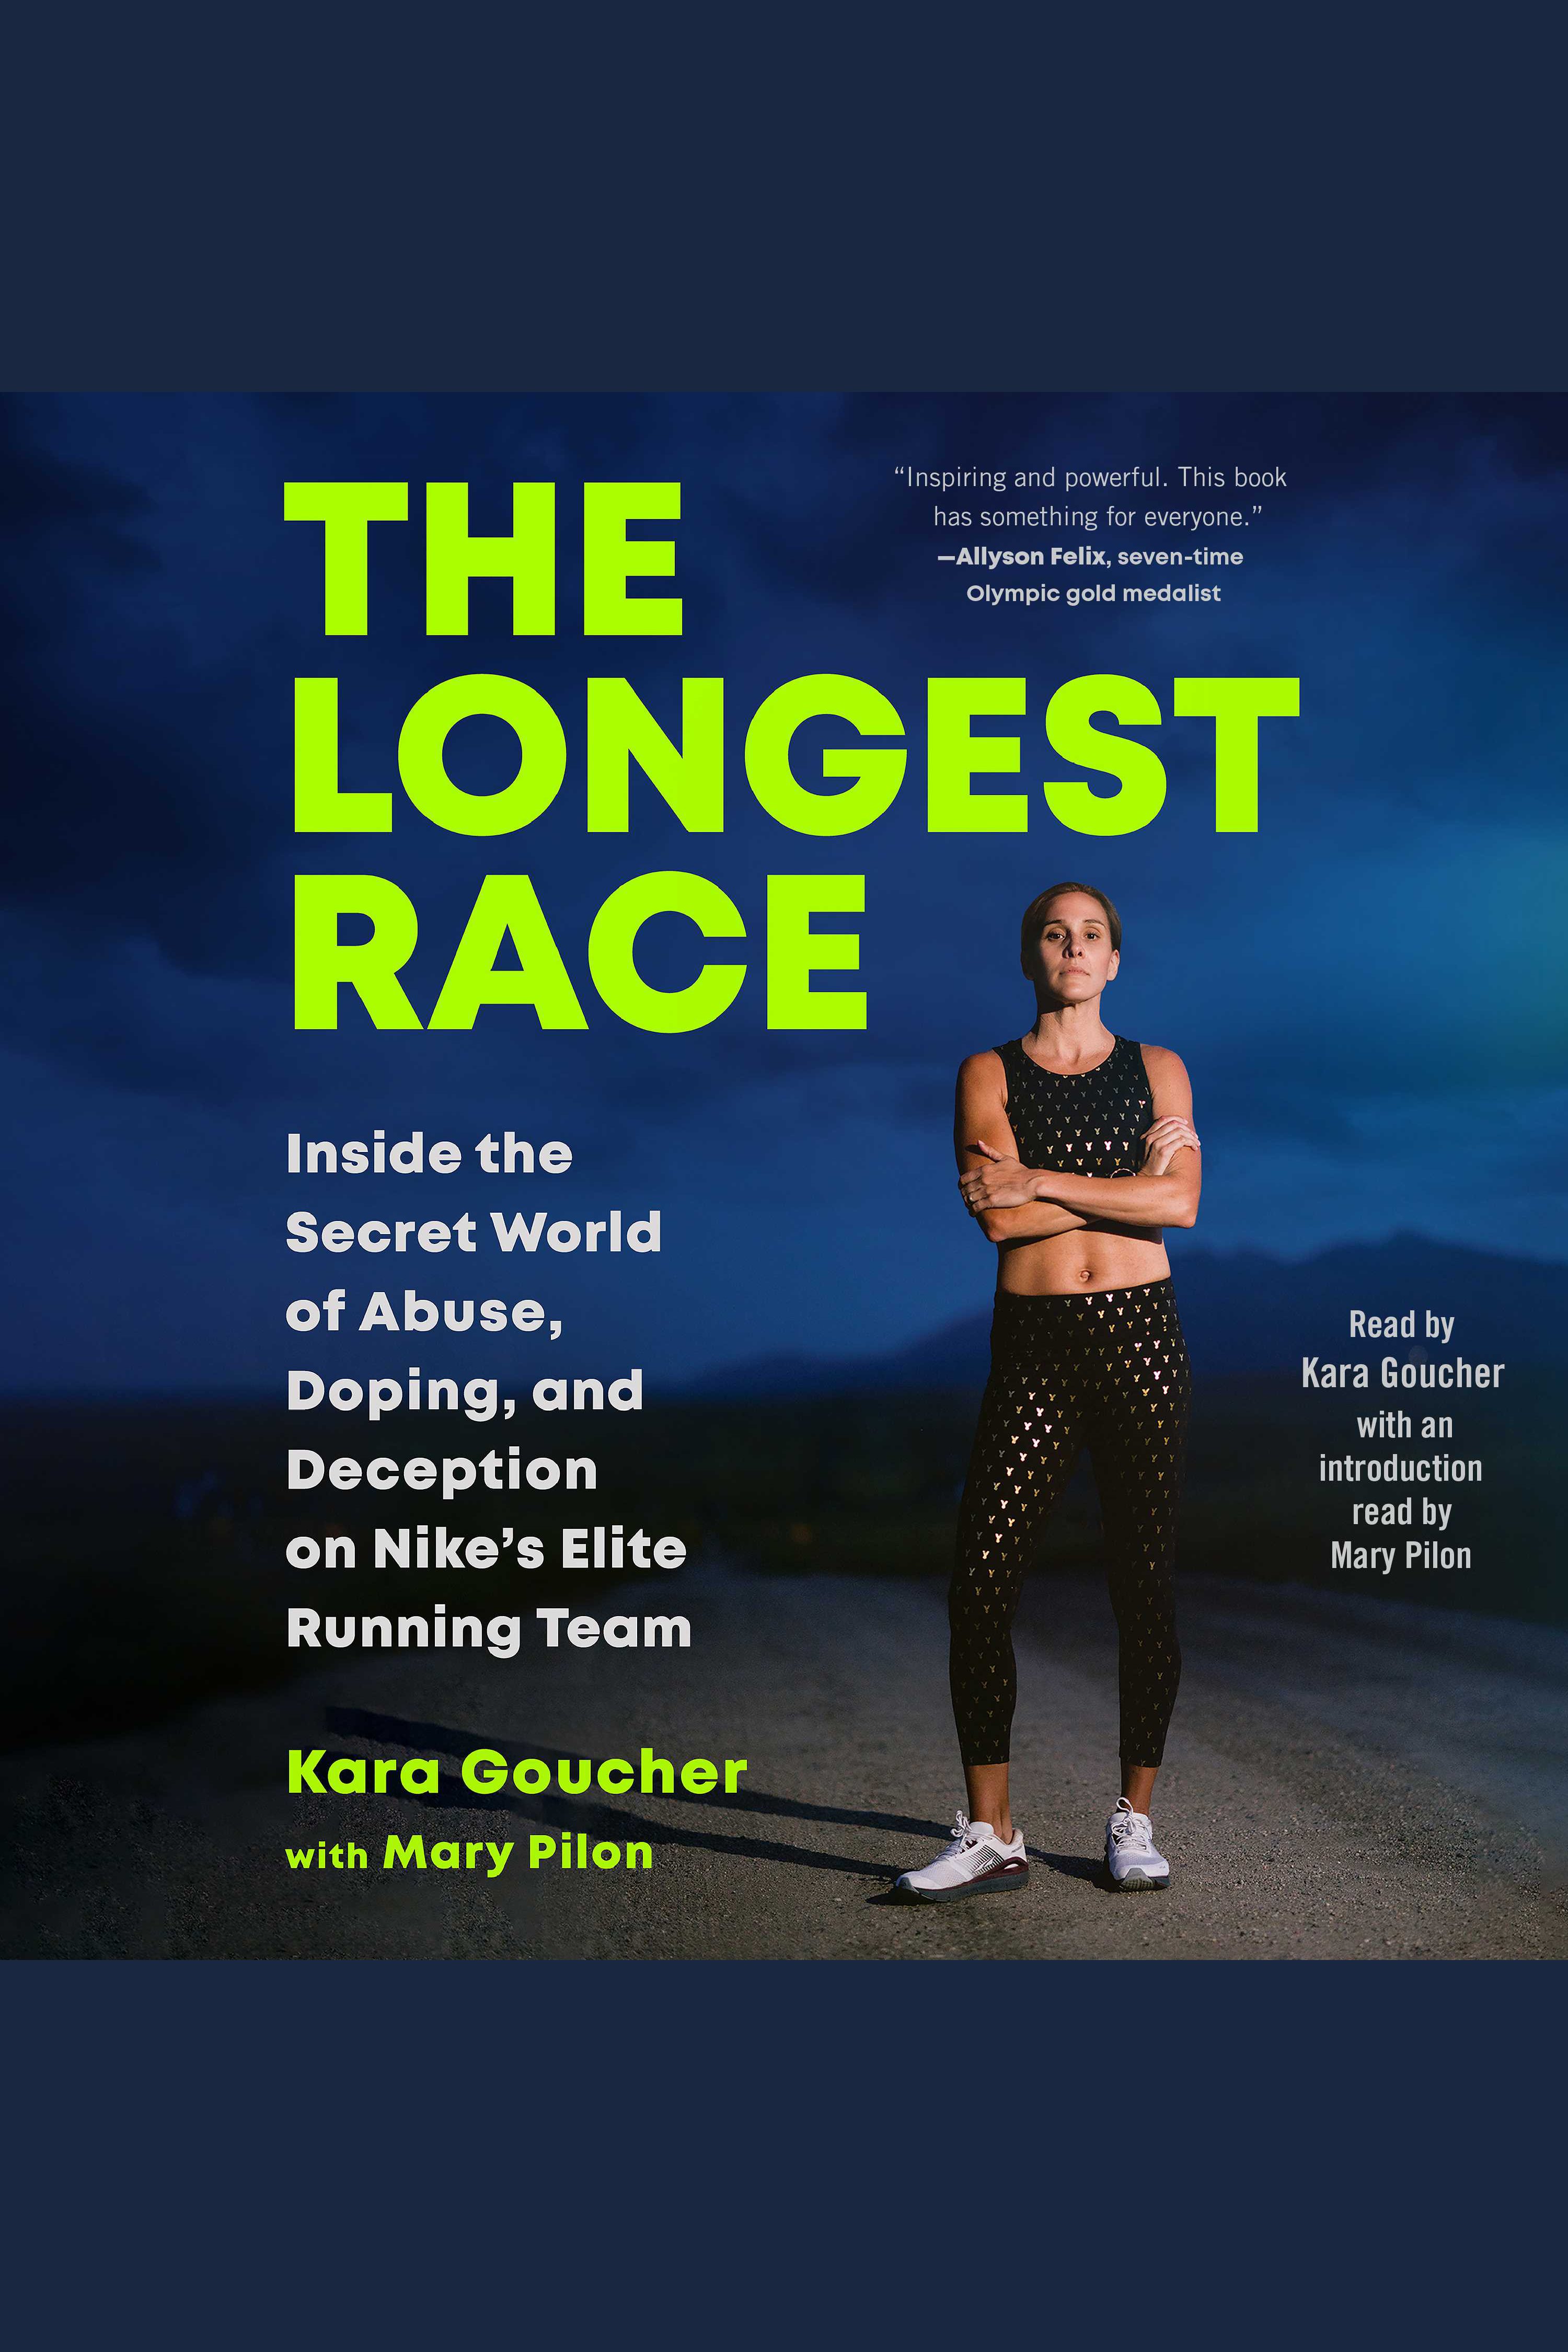 The Longest Race Inside the Secret World of Abuse, Doping, and Deception on Nike's Elite Running Team cover image